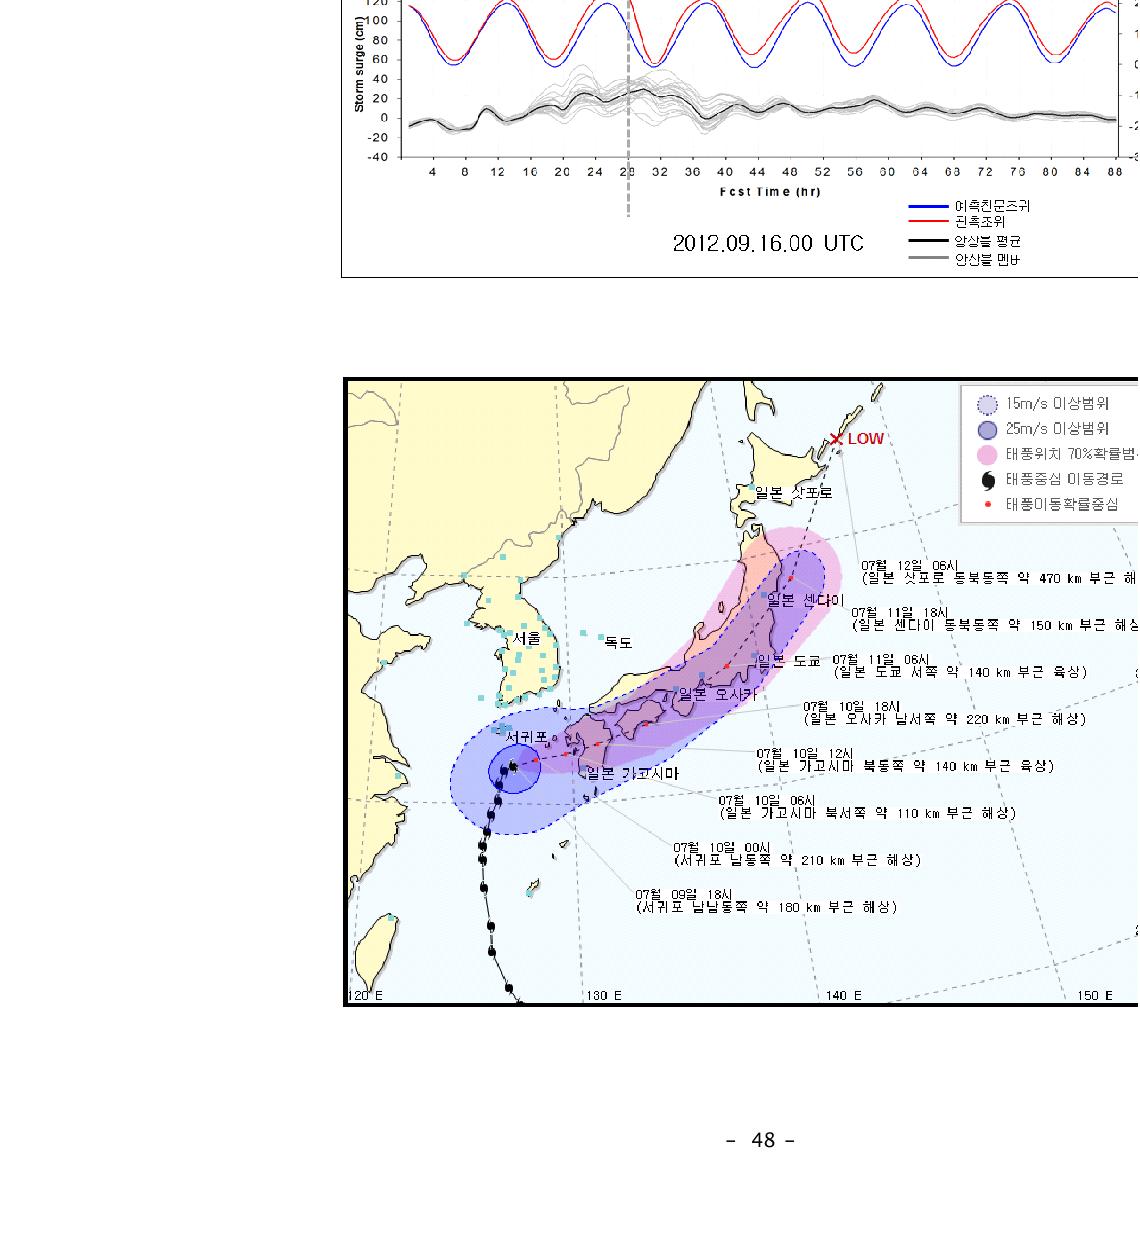 Time-series of storm surge height at Masan.